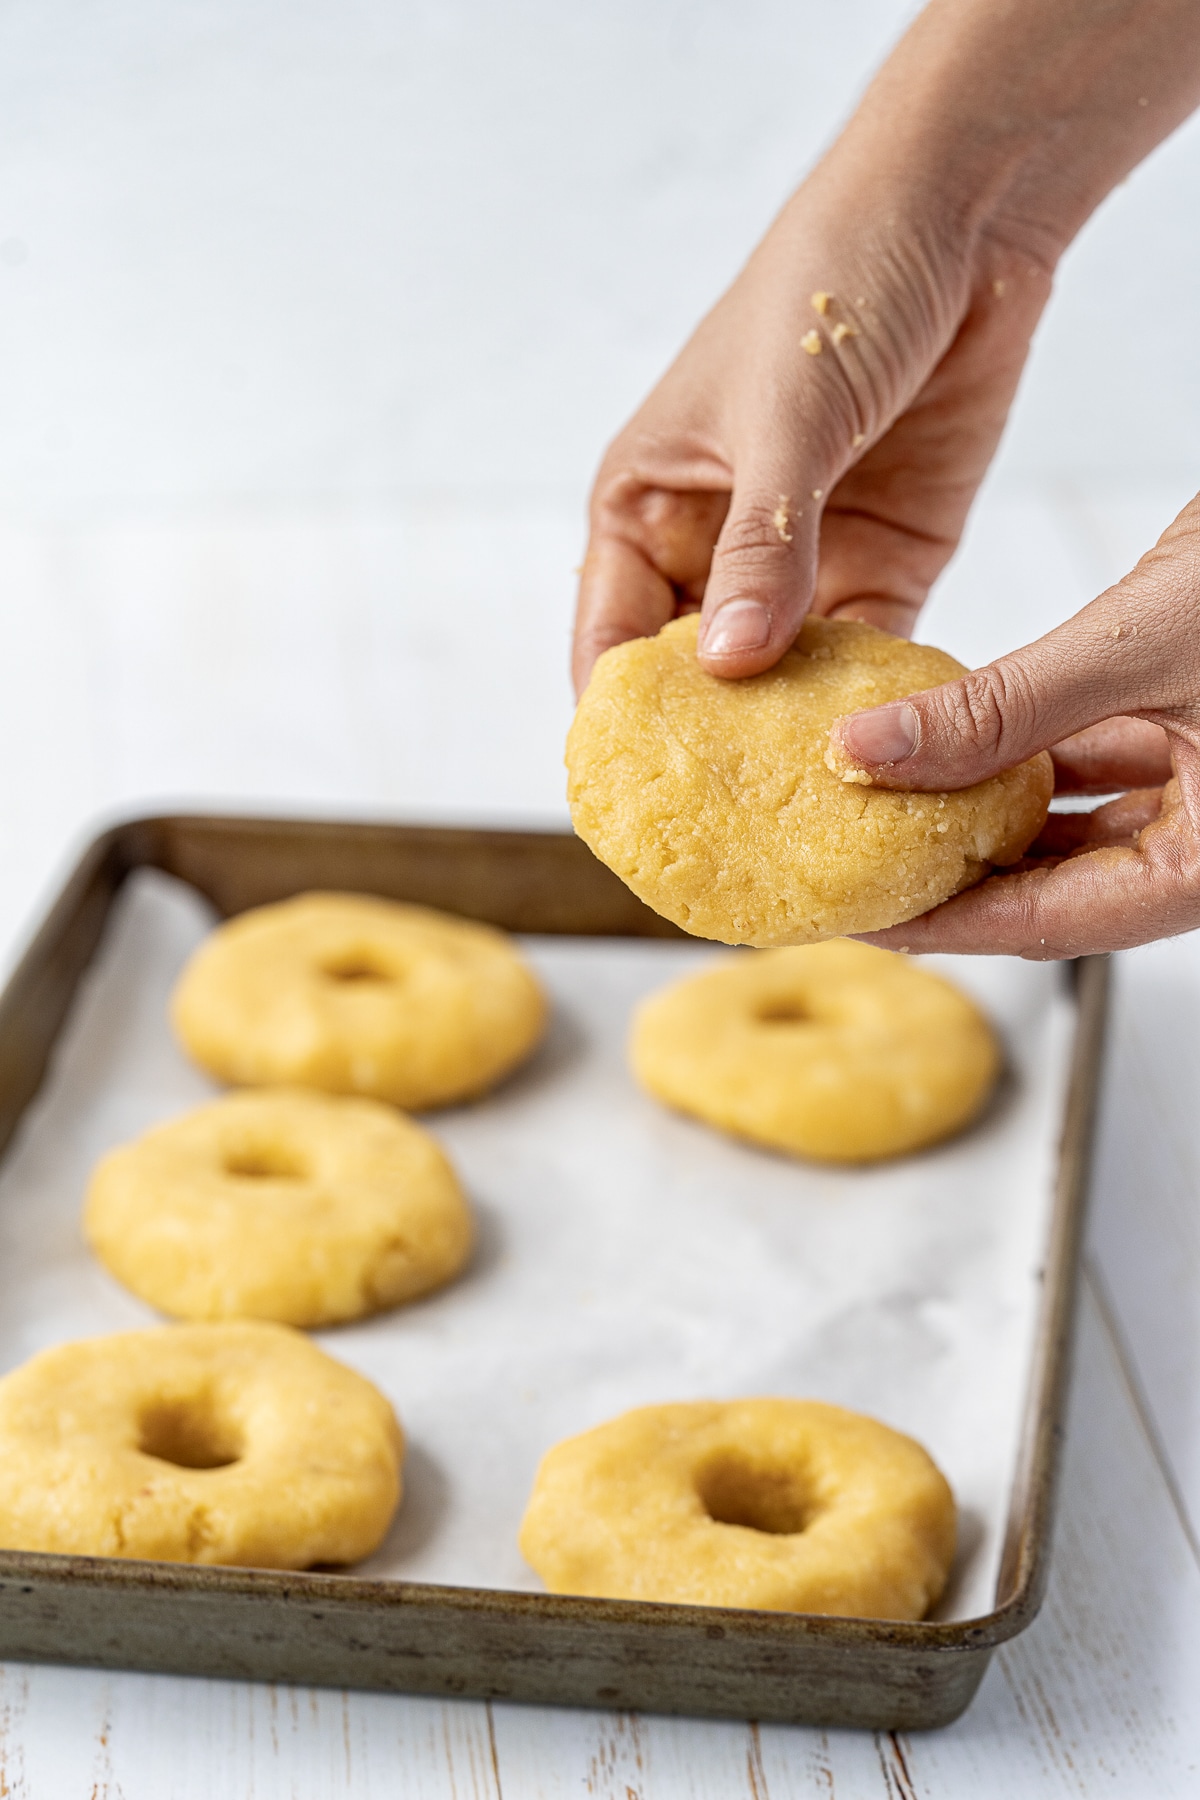 Picture of uncooked low carb bagels on a baking tray lined with parchment paper and a hand holding some dough formed into a circle.